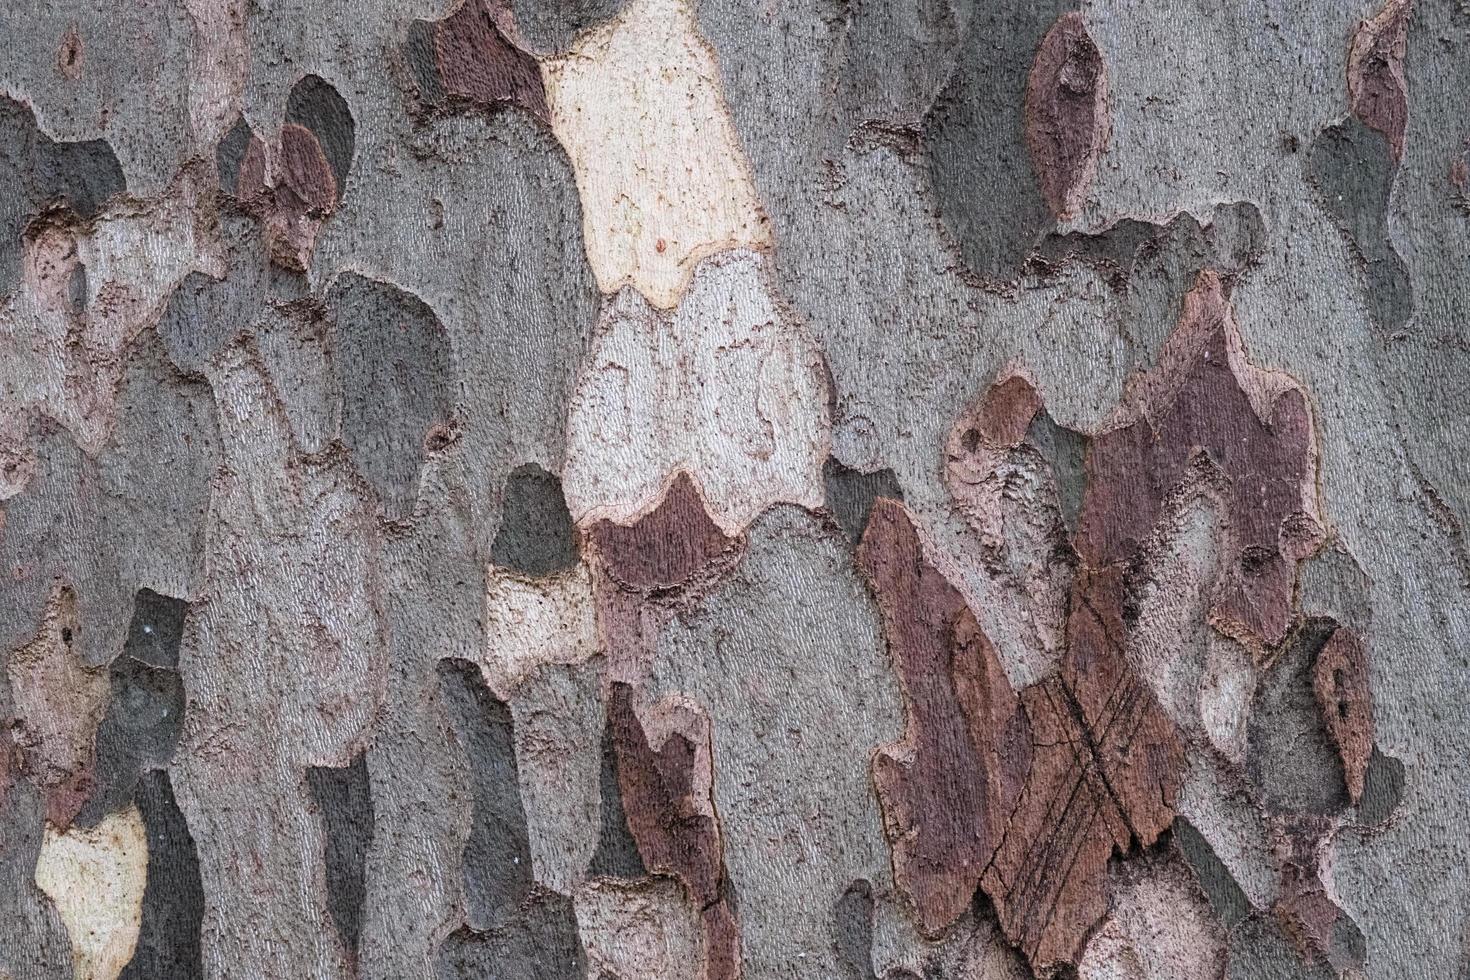 Bark of a platan tree, texture, old wood, pattern, sycamore skin, natural plane tree camouflage material, closeup, organic textured surface. photo